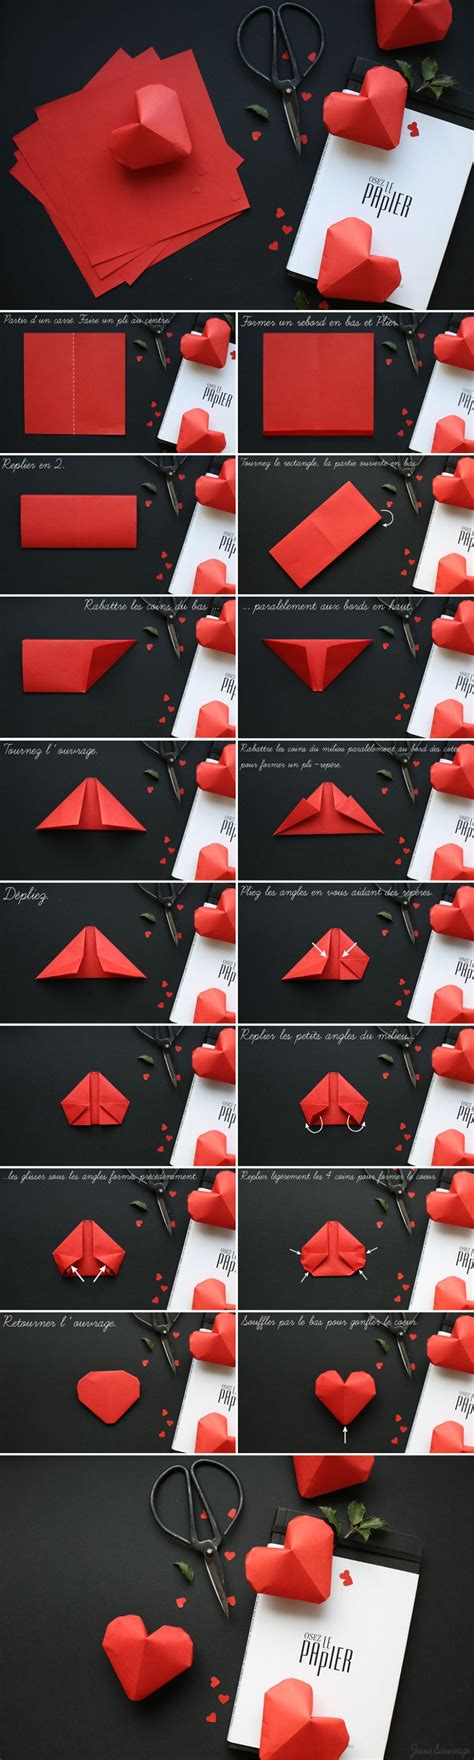 How To Fold Lovely 3d Origami Hearts How To Instructions